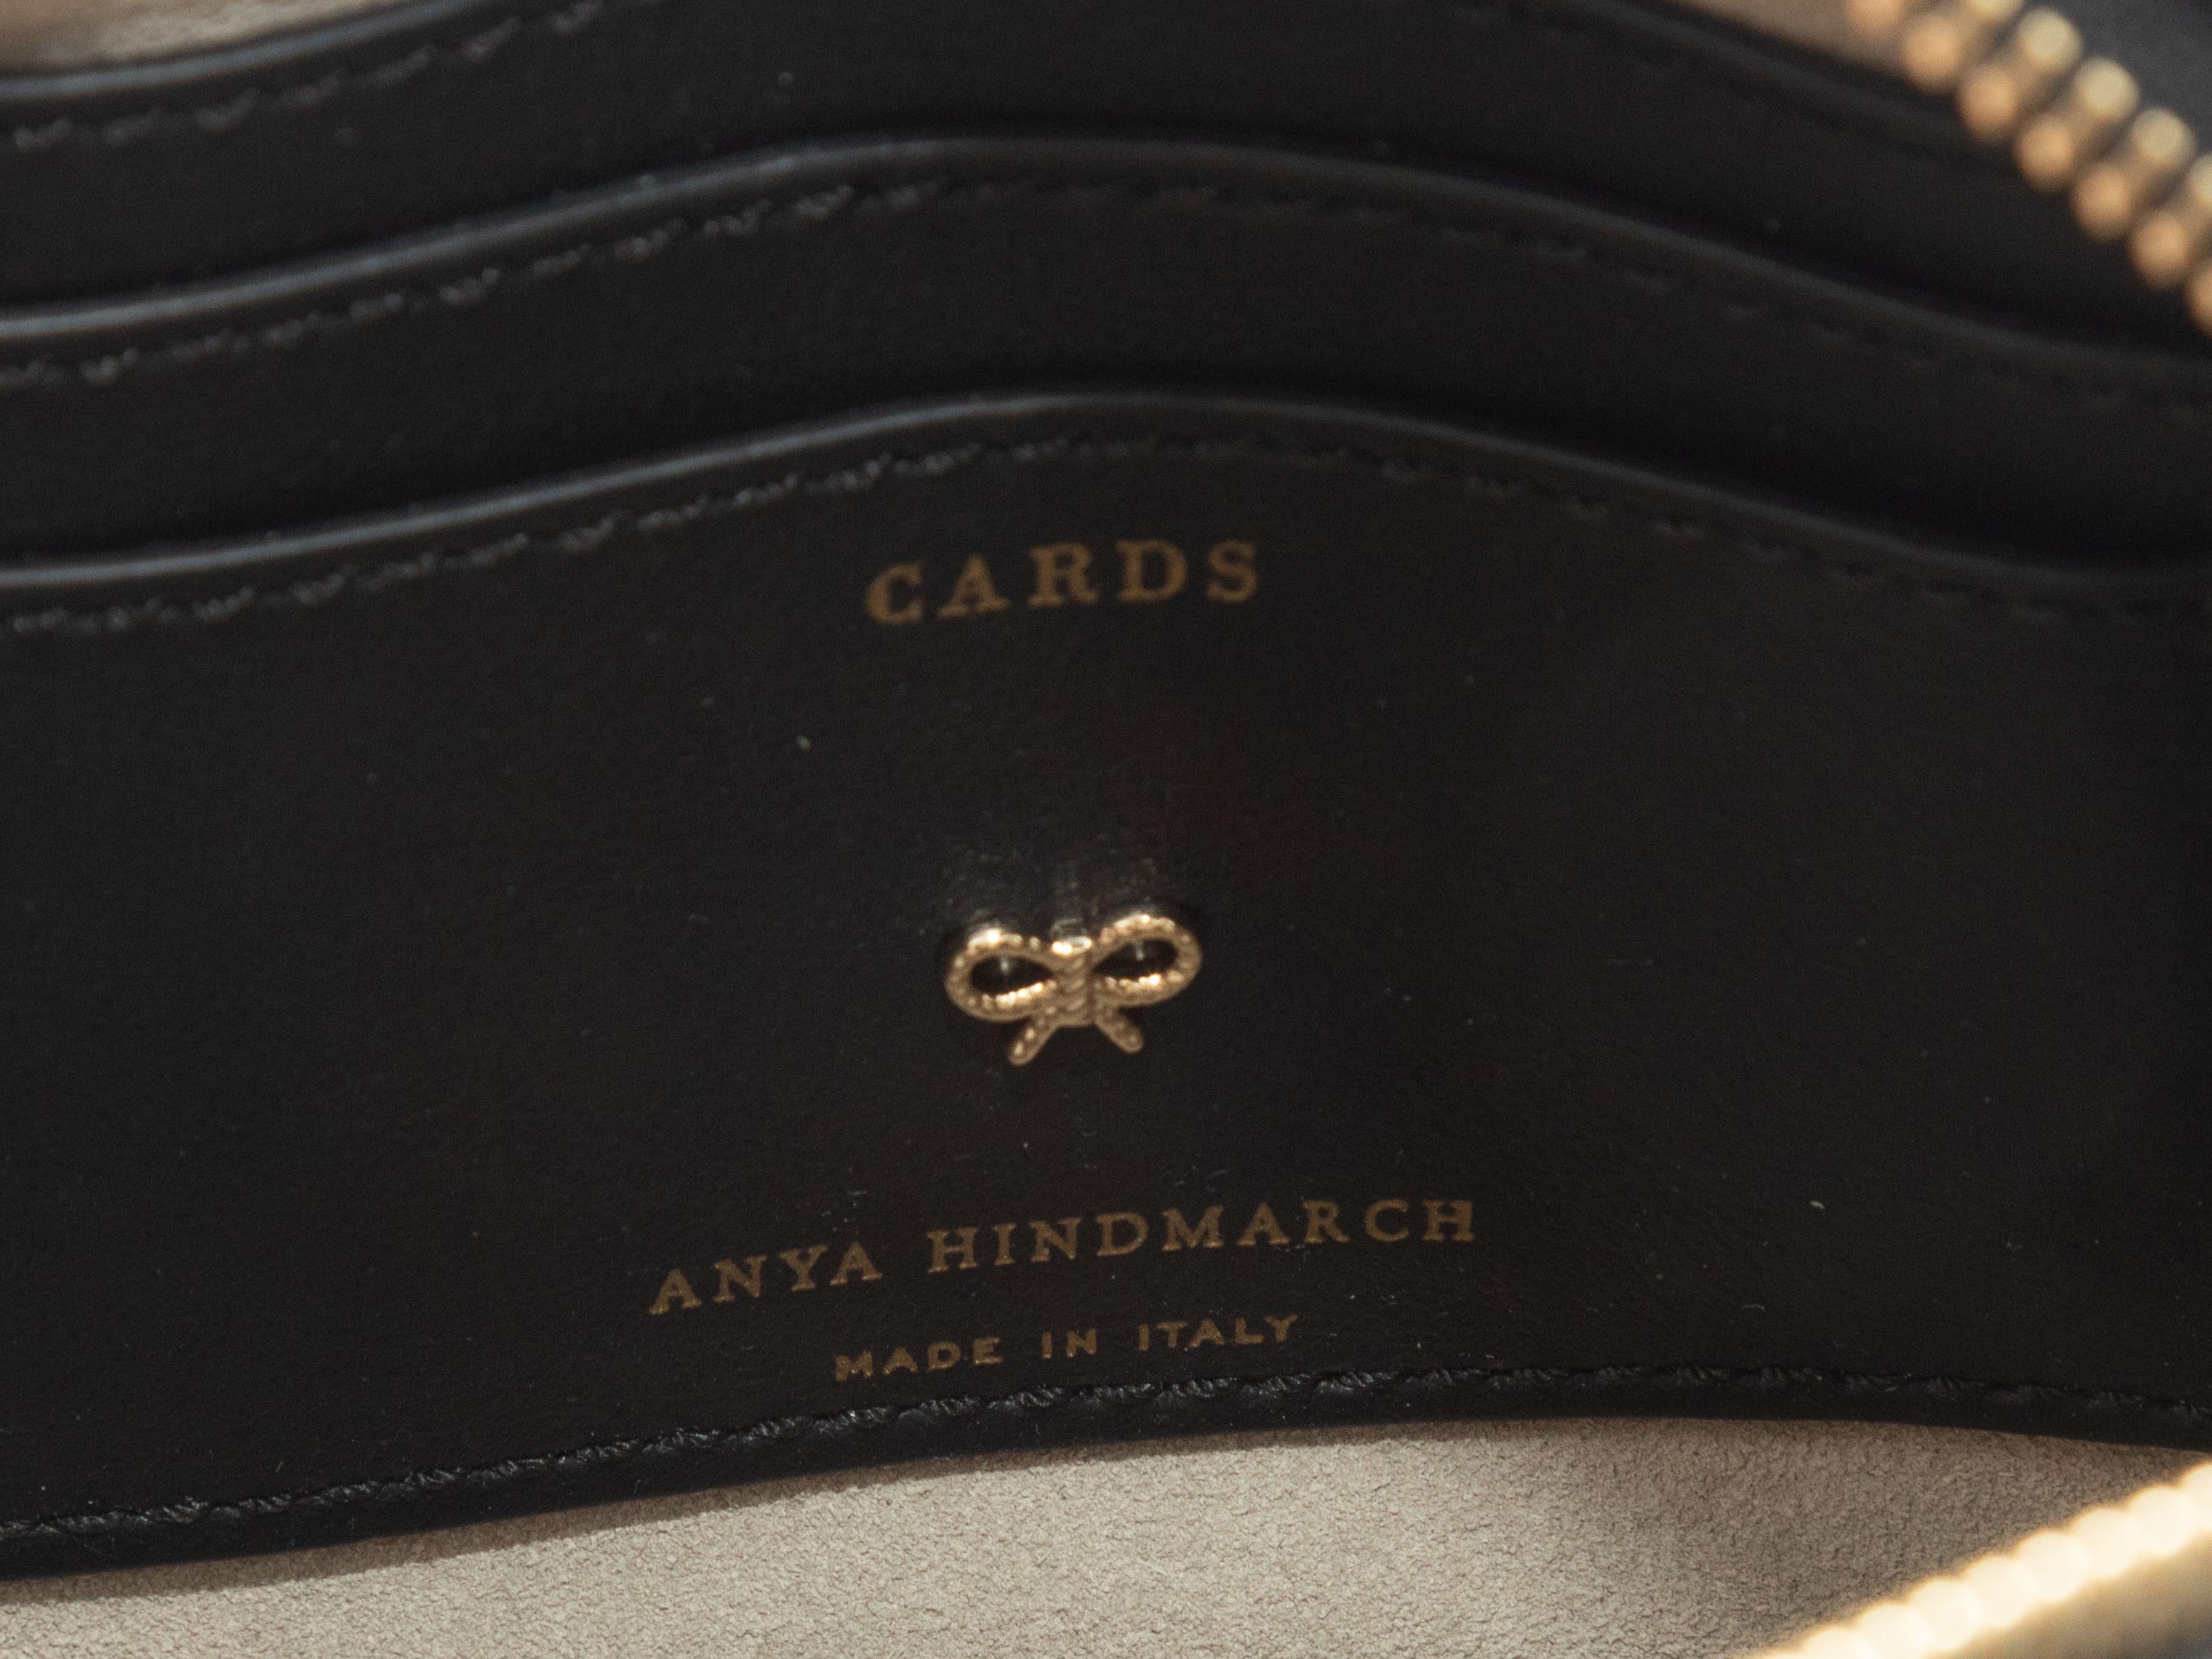 Product Details: Black & Multicolor Anya Hindmarch Allover Sticker Print Crossbody Bag. This bag features an embossed leather body, gold-tone hardware, interior card slots, a single flat crossbody strap, and a tassel-accented top zip closure. 7